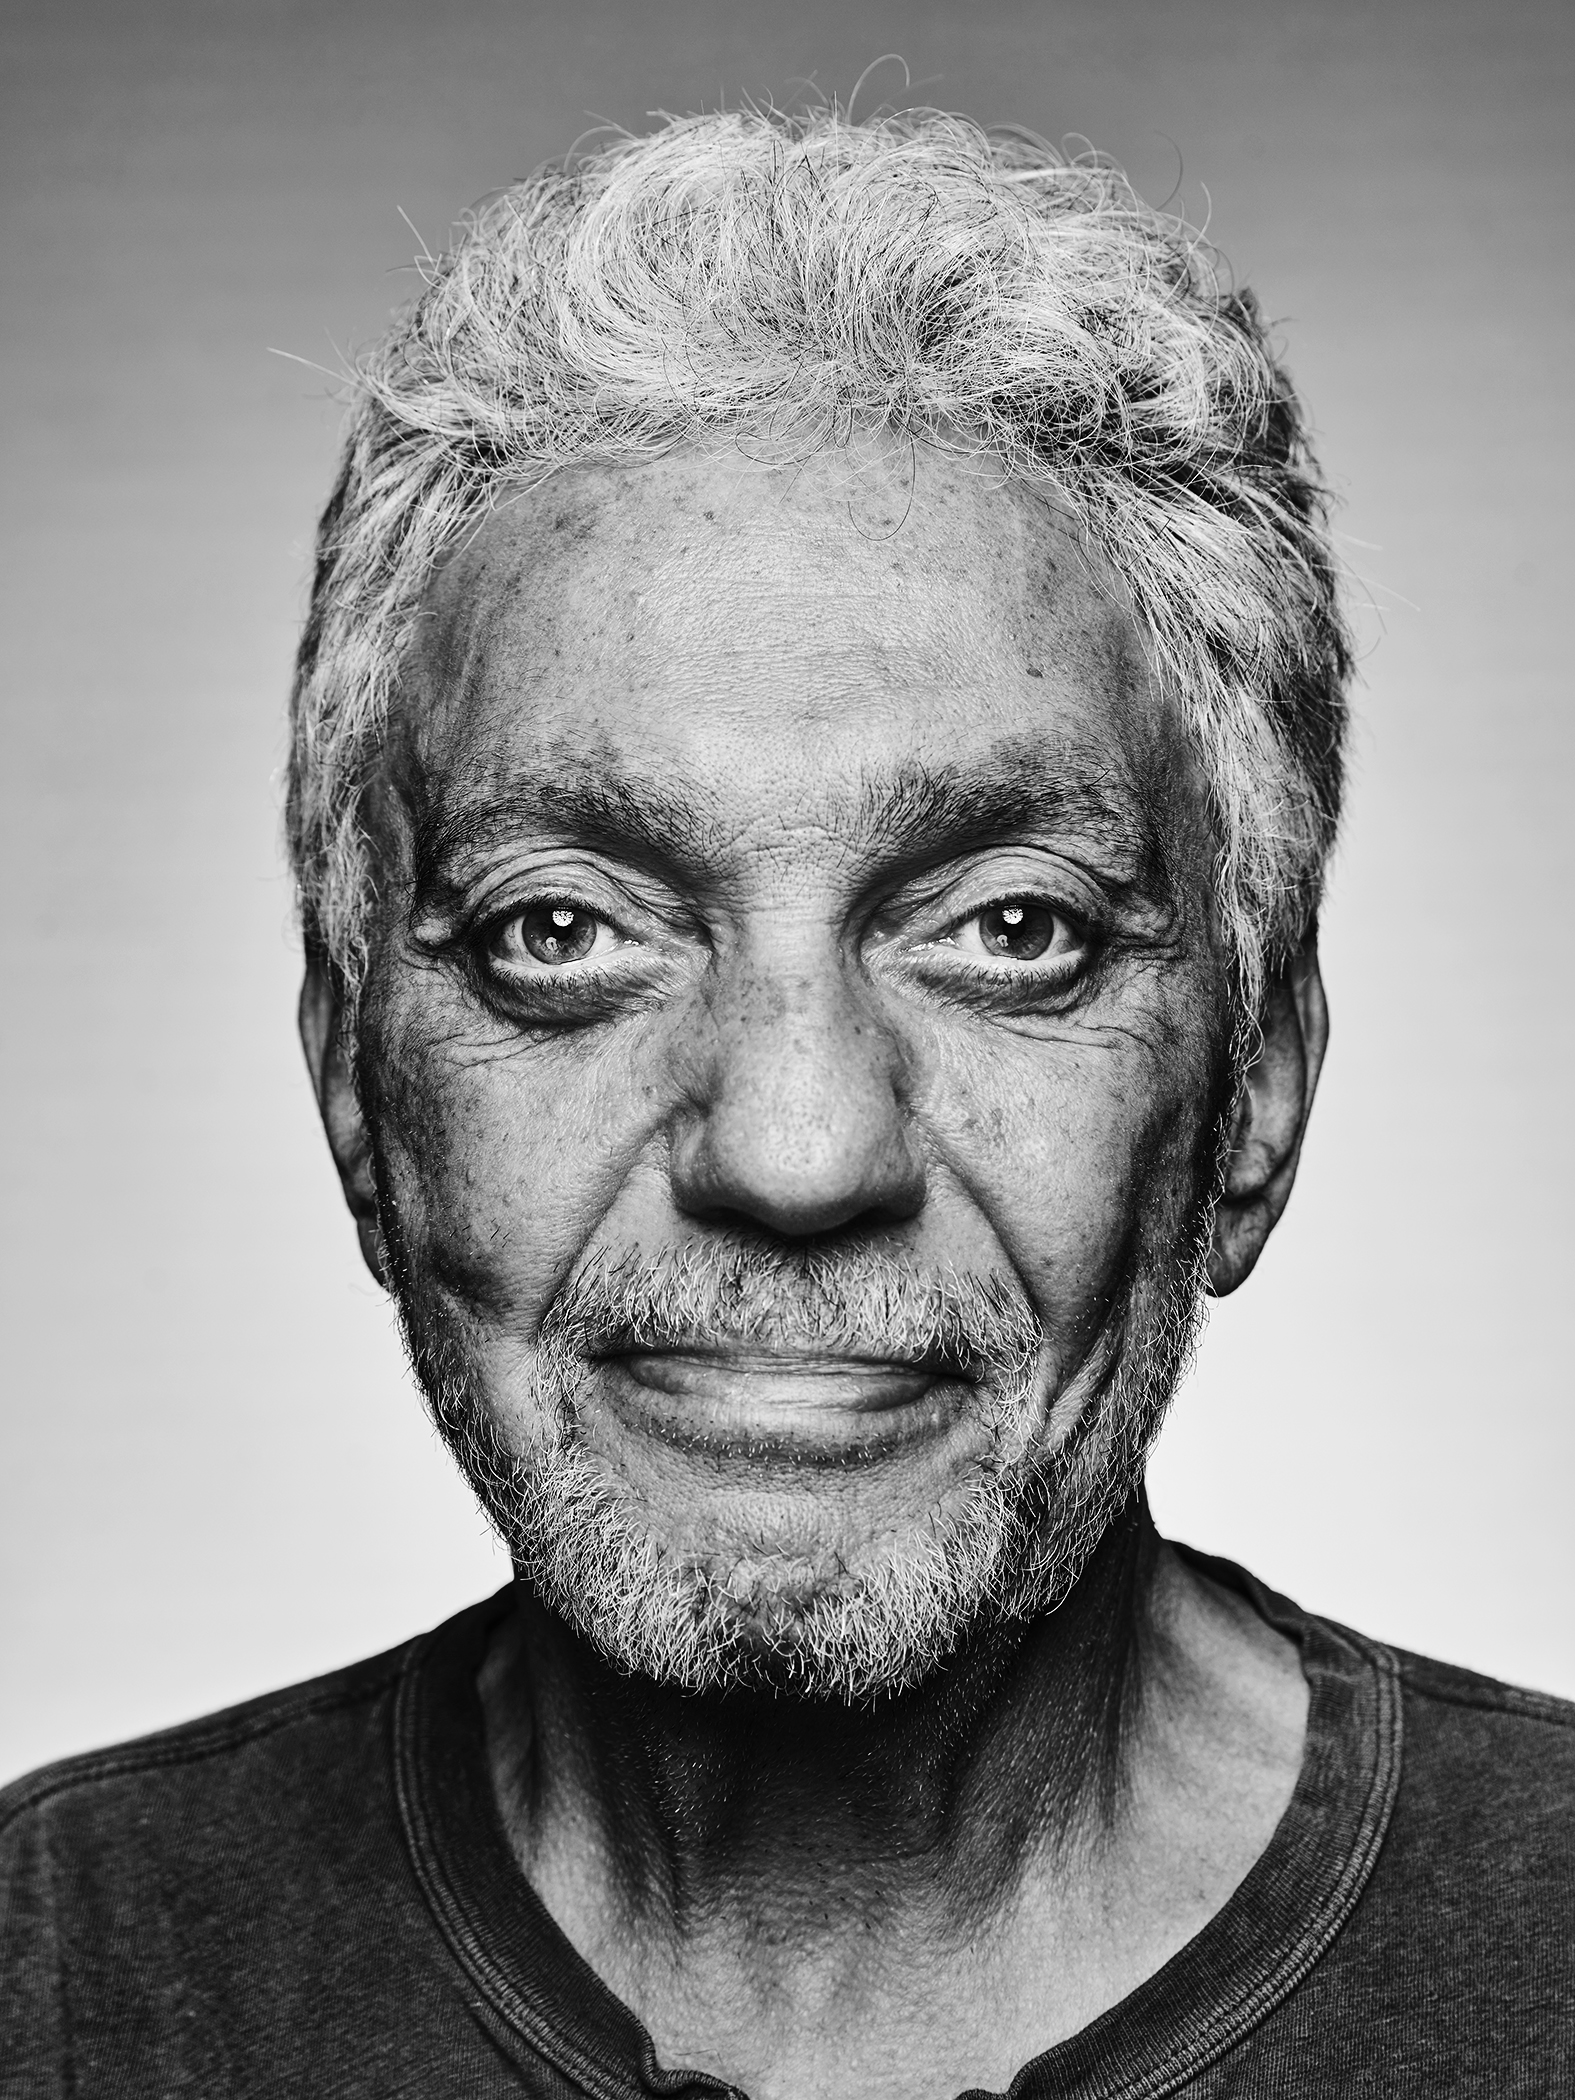 Steve Gadd, photographed at the Royal Gardens Hotel, London, 14 July 2018. Photo by Adam Gasson / adamgasson.com